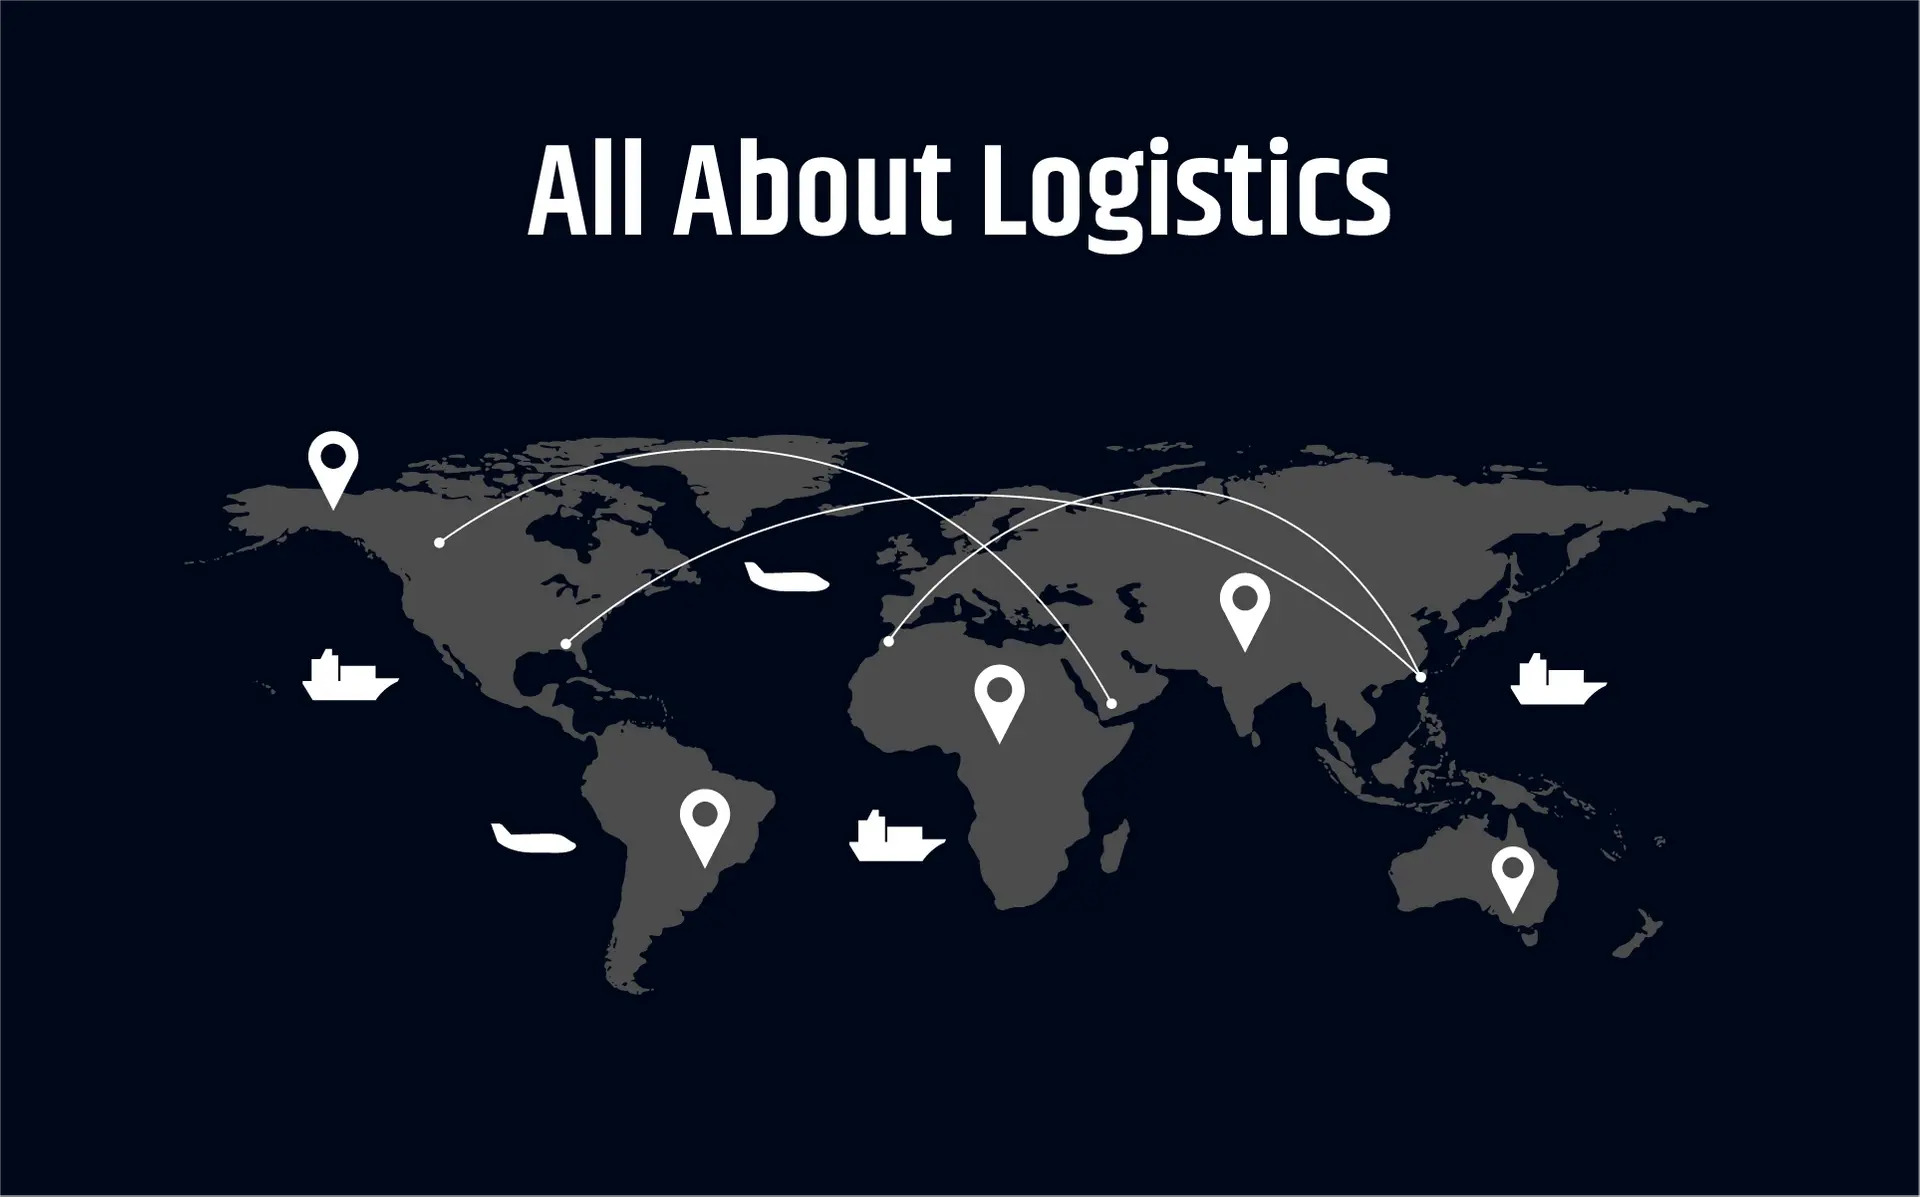 What Is a Logistics Company? What Type of Services Do They Provide?